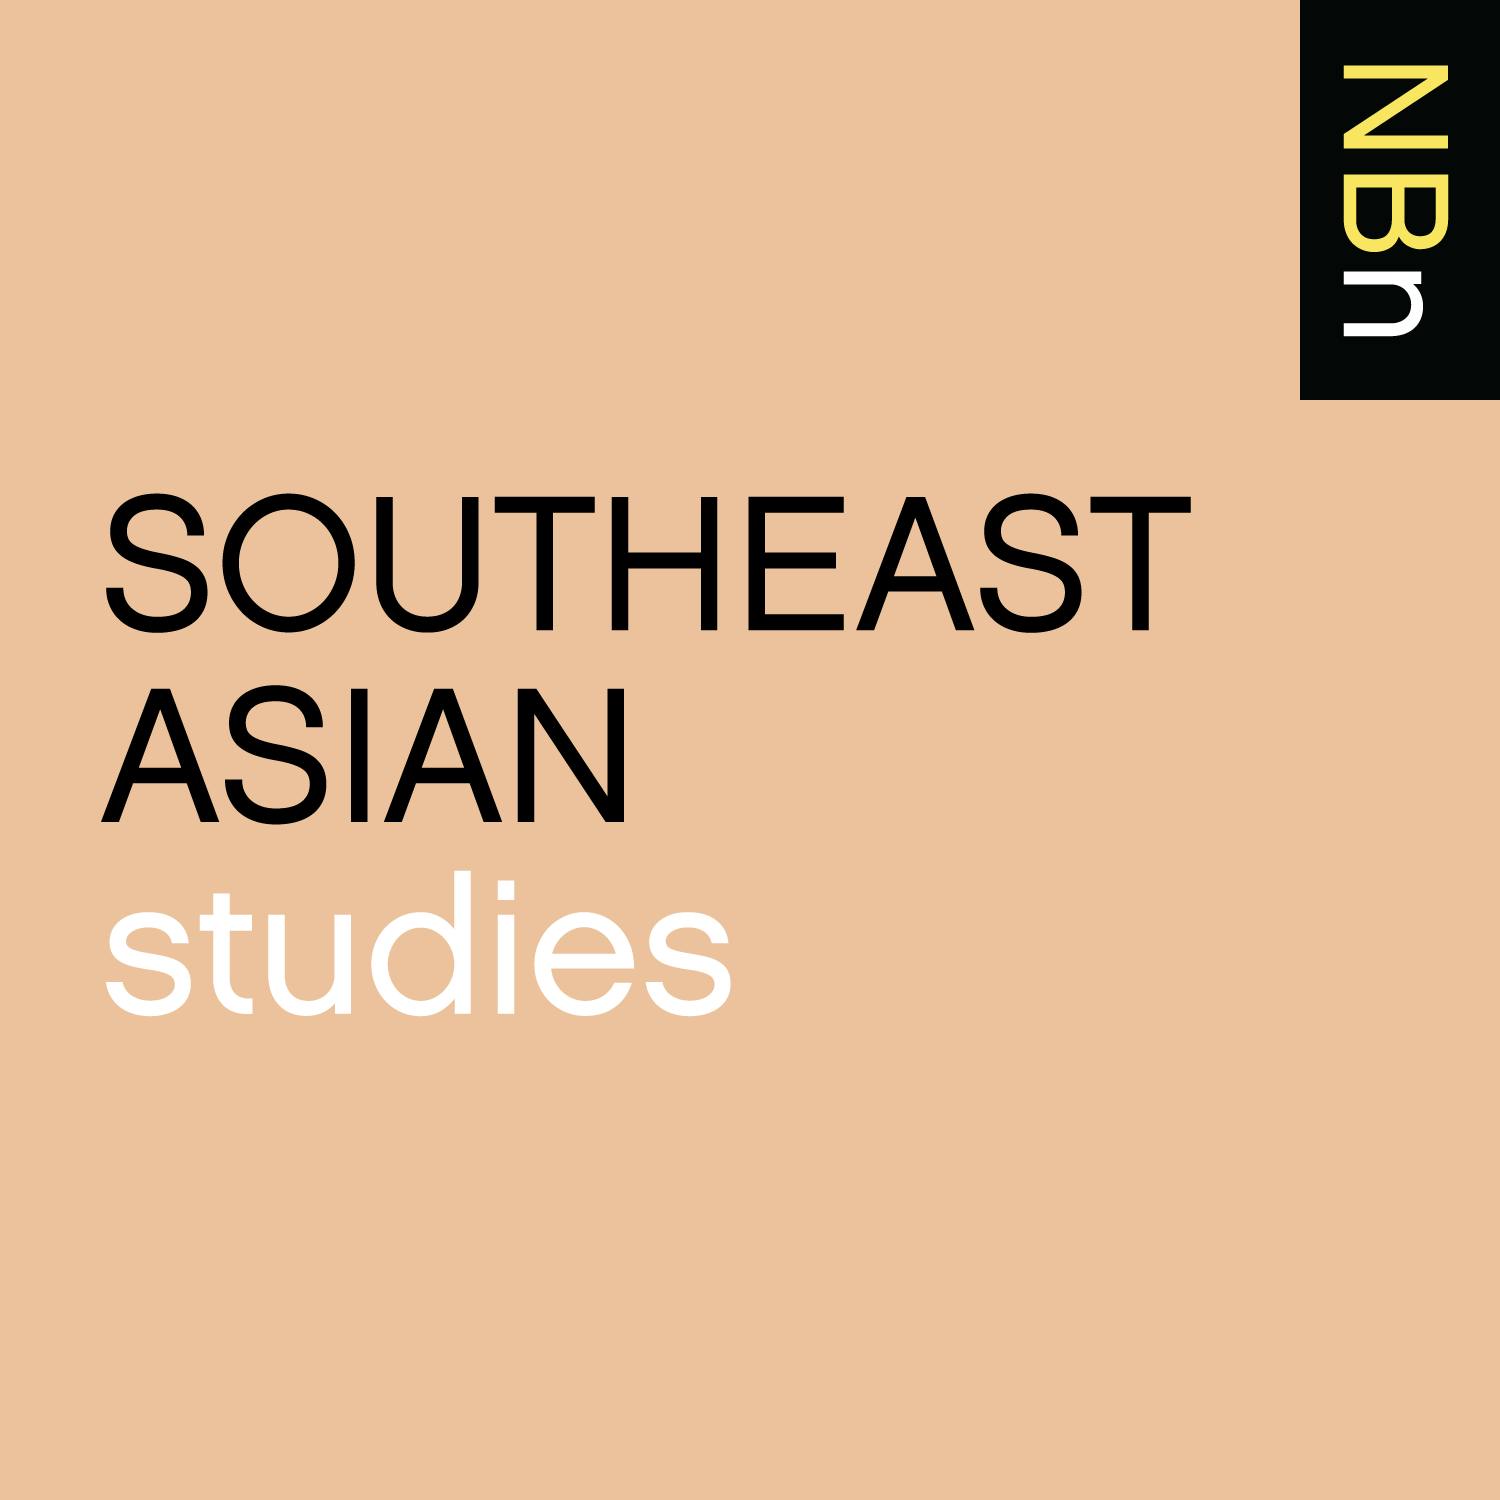 Premium Ad-Free: New Books in Southeast Asian Studies podcast tile